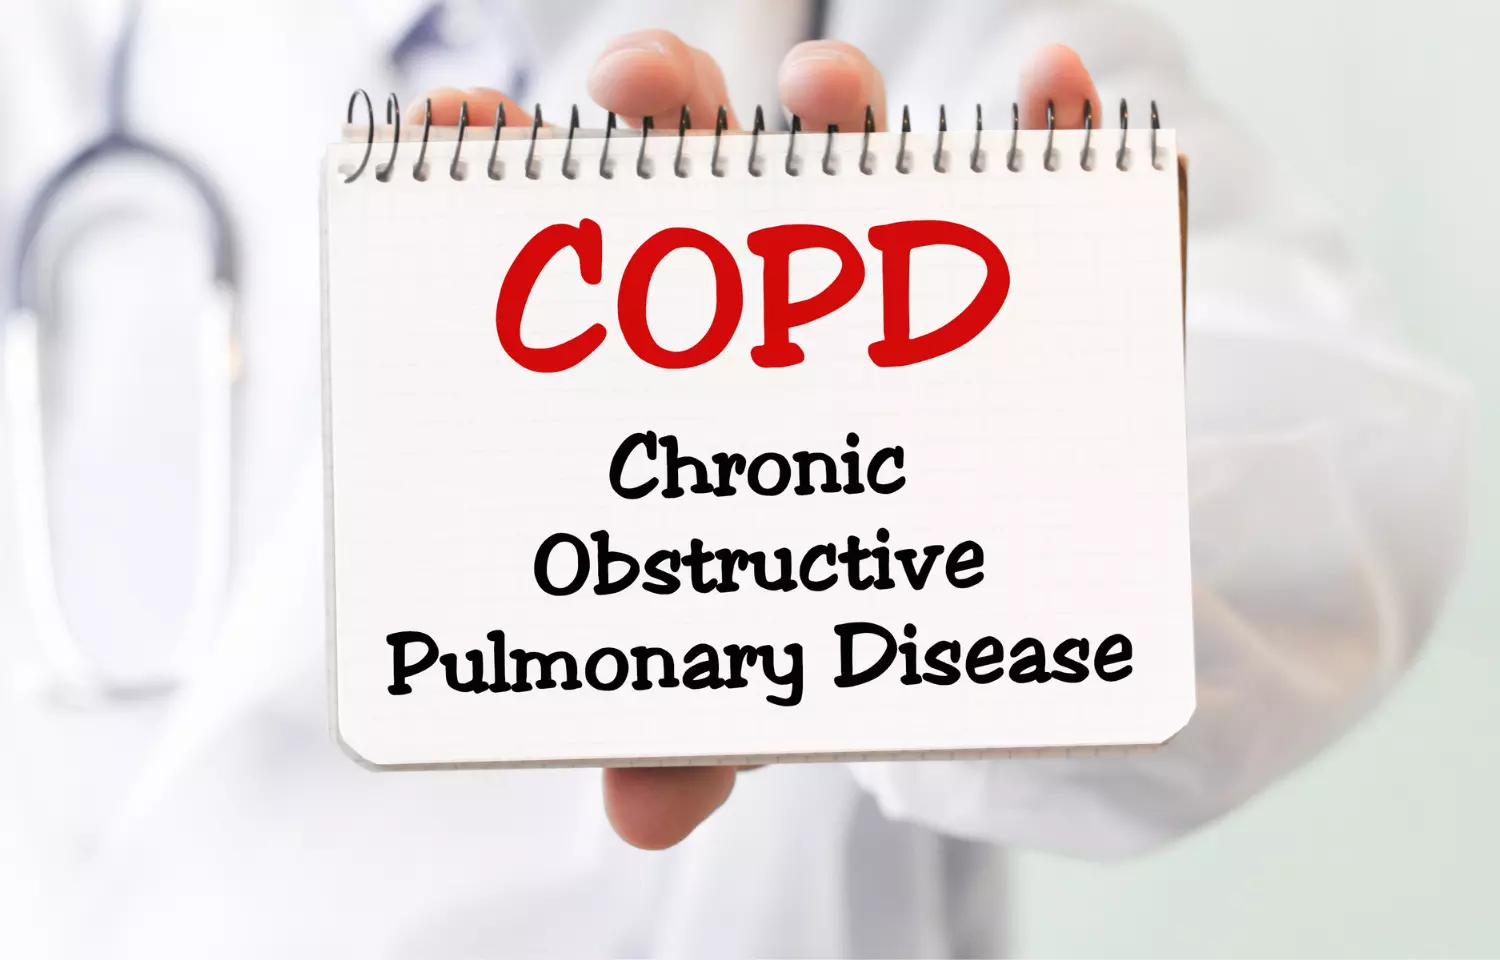 New tool better predicts COPD risk for people of non-European ancestry